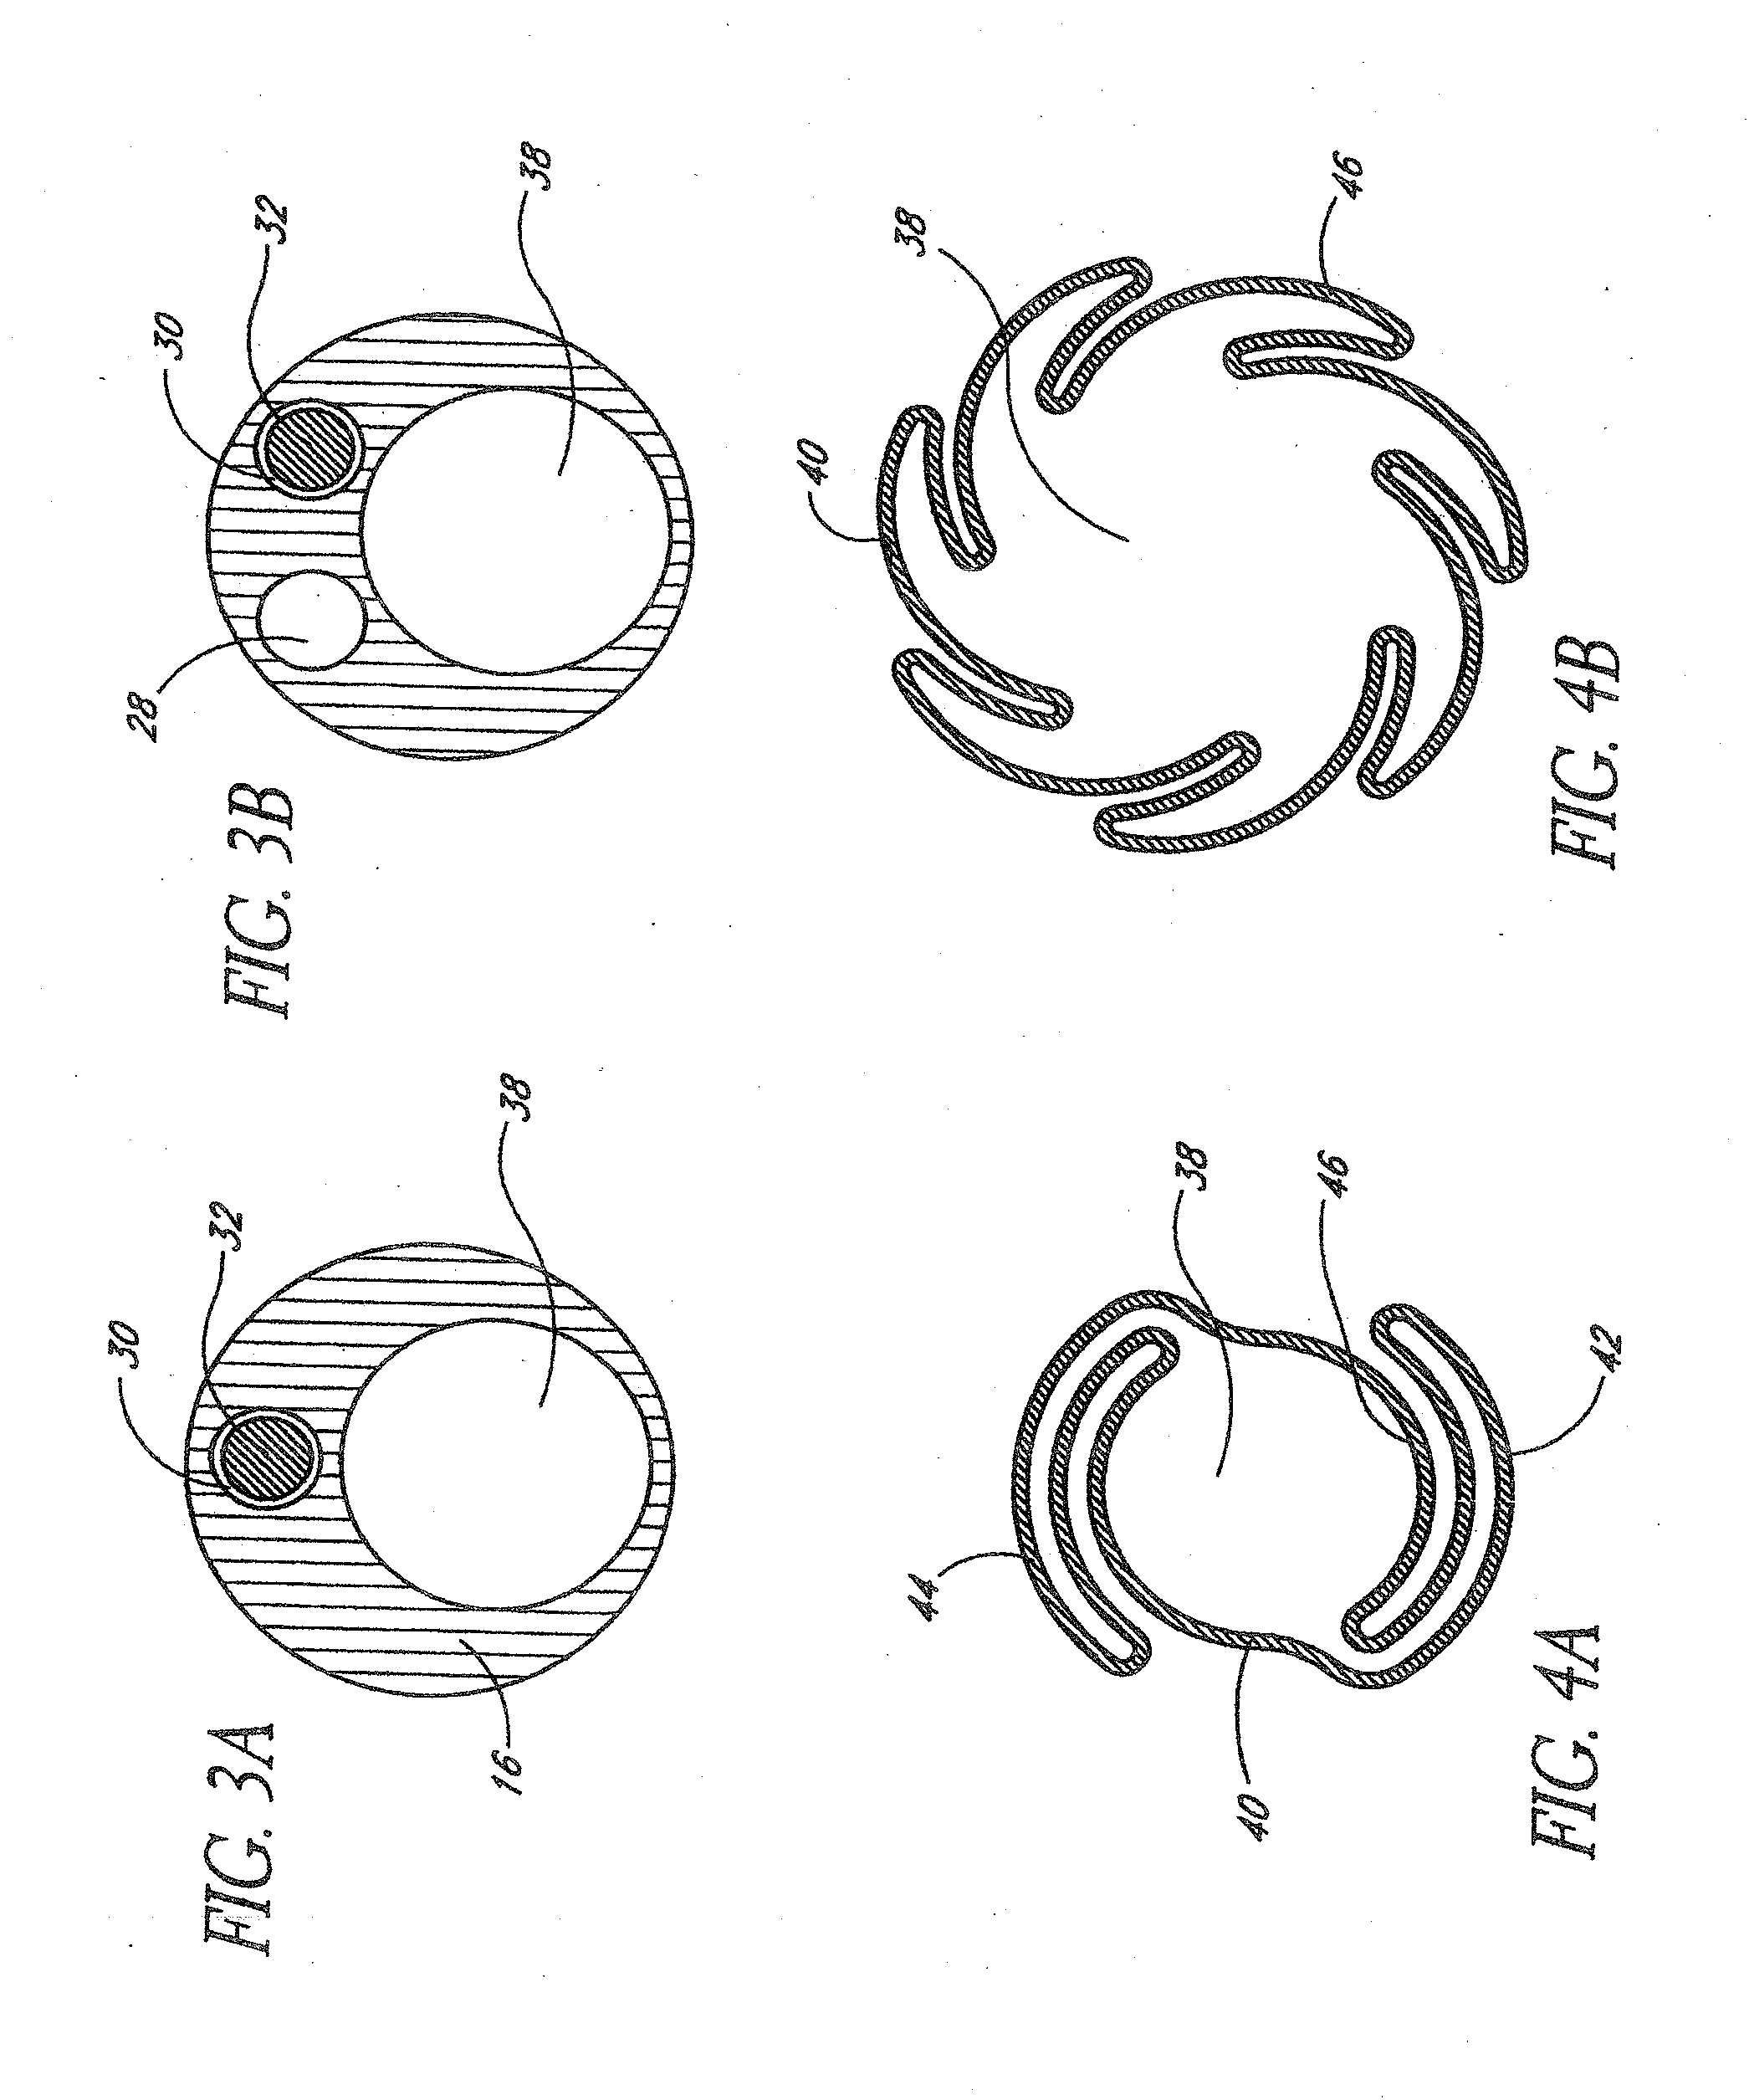 Systems And Methods For Removing Obstructive Matter From Body Lumens And Treating Vascular Defects